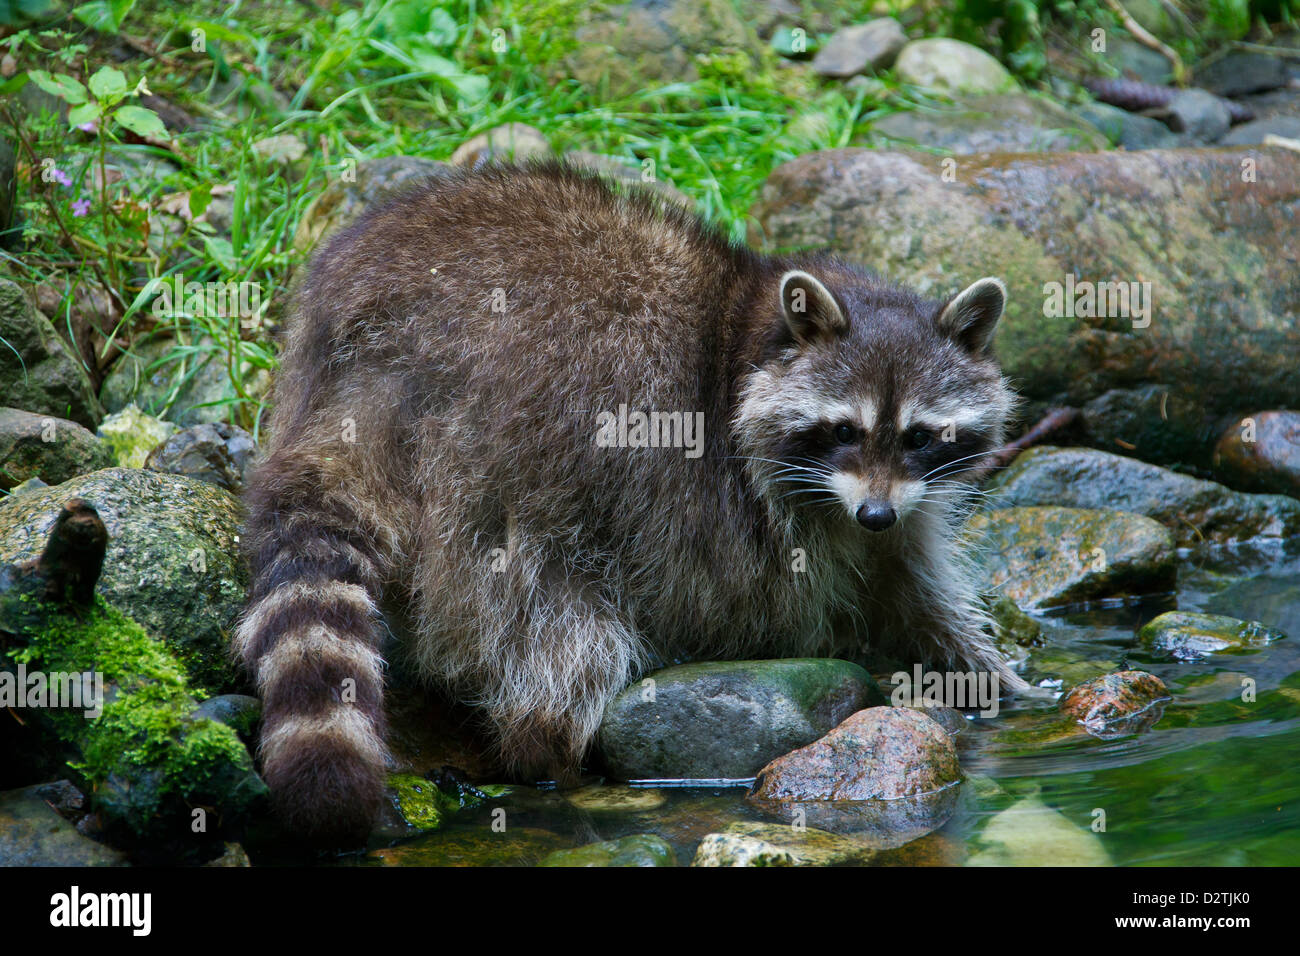 North American raccoon (Procyon lotor), native to North America, on river bank Stock Photo